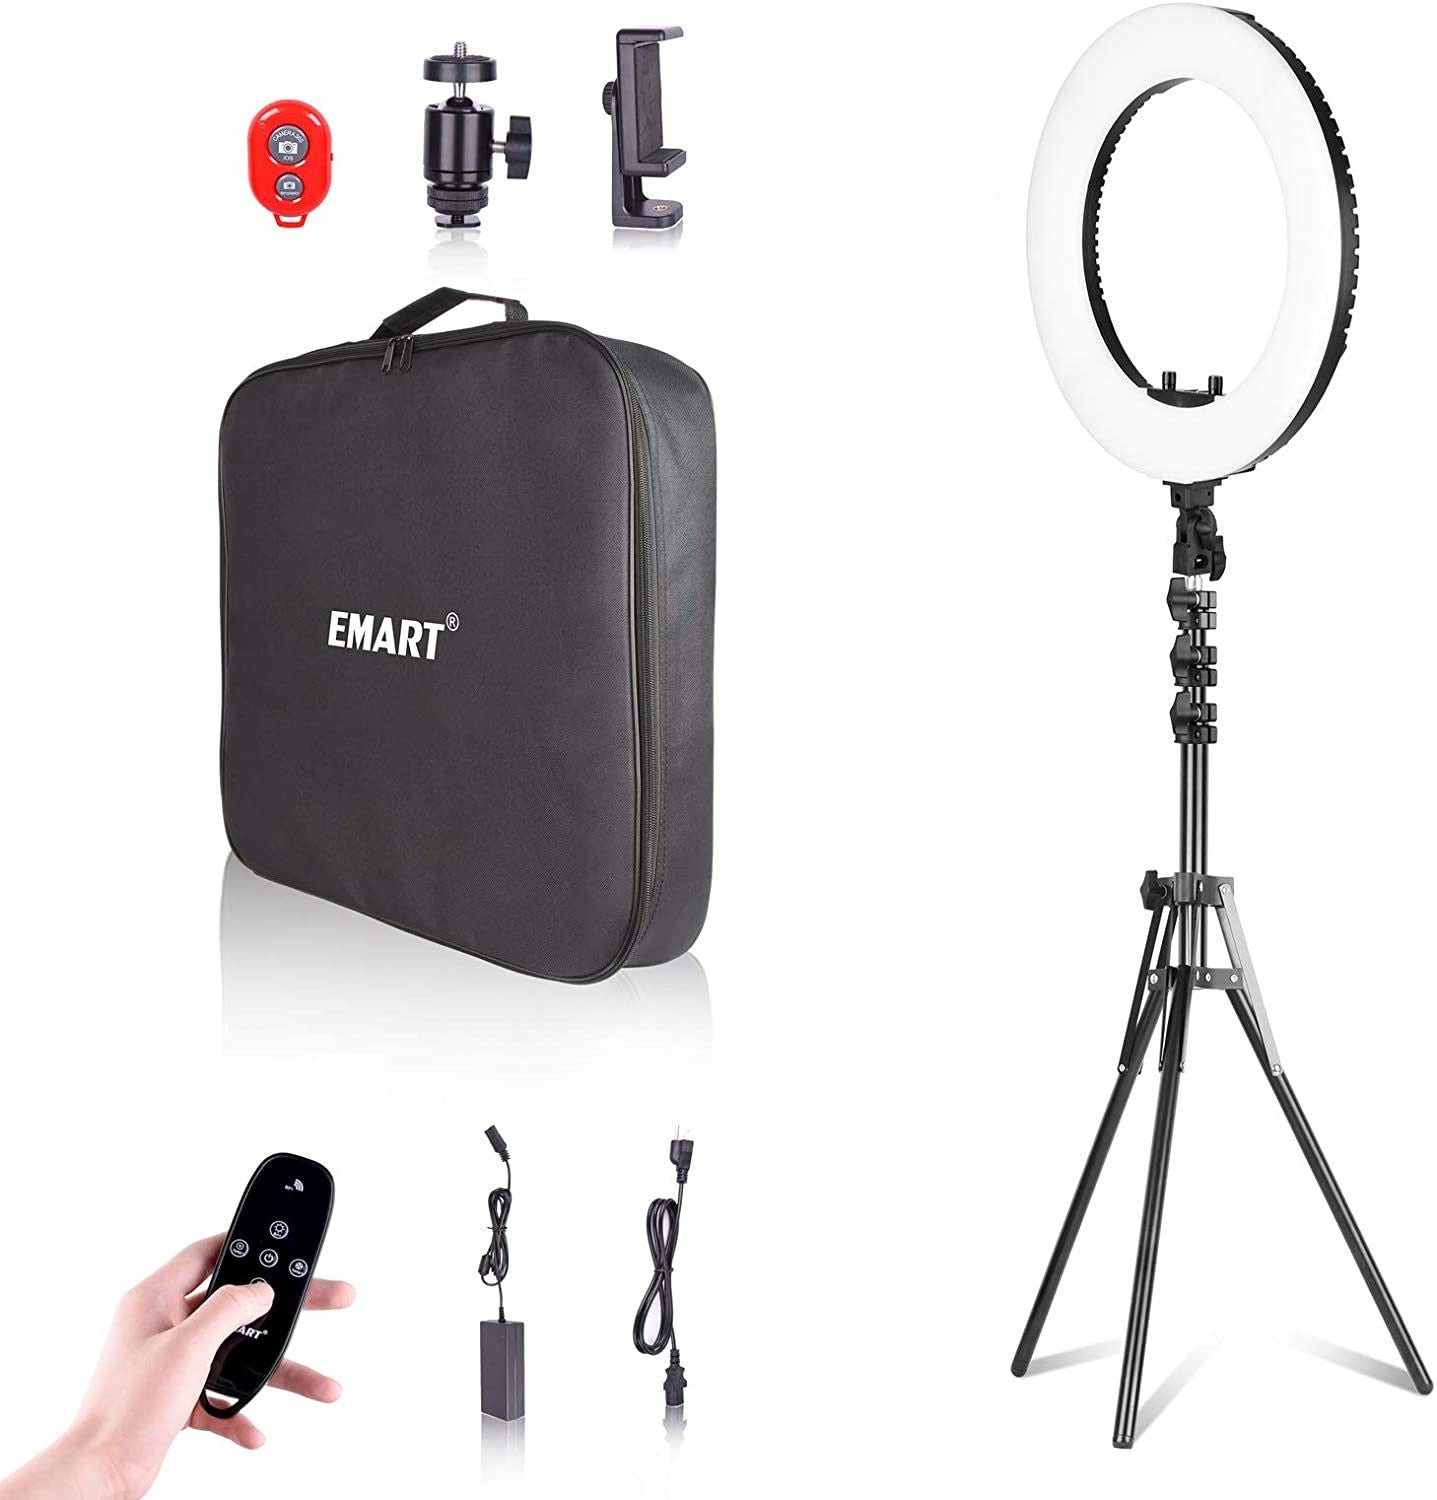 Neewer 18 LED Ring Light Kit  Neewer Photography & Videography